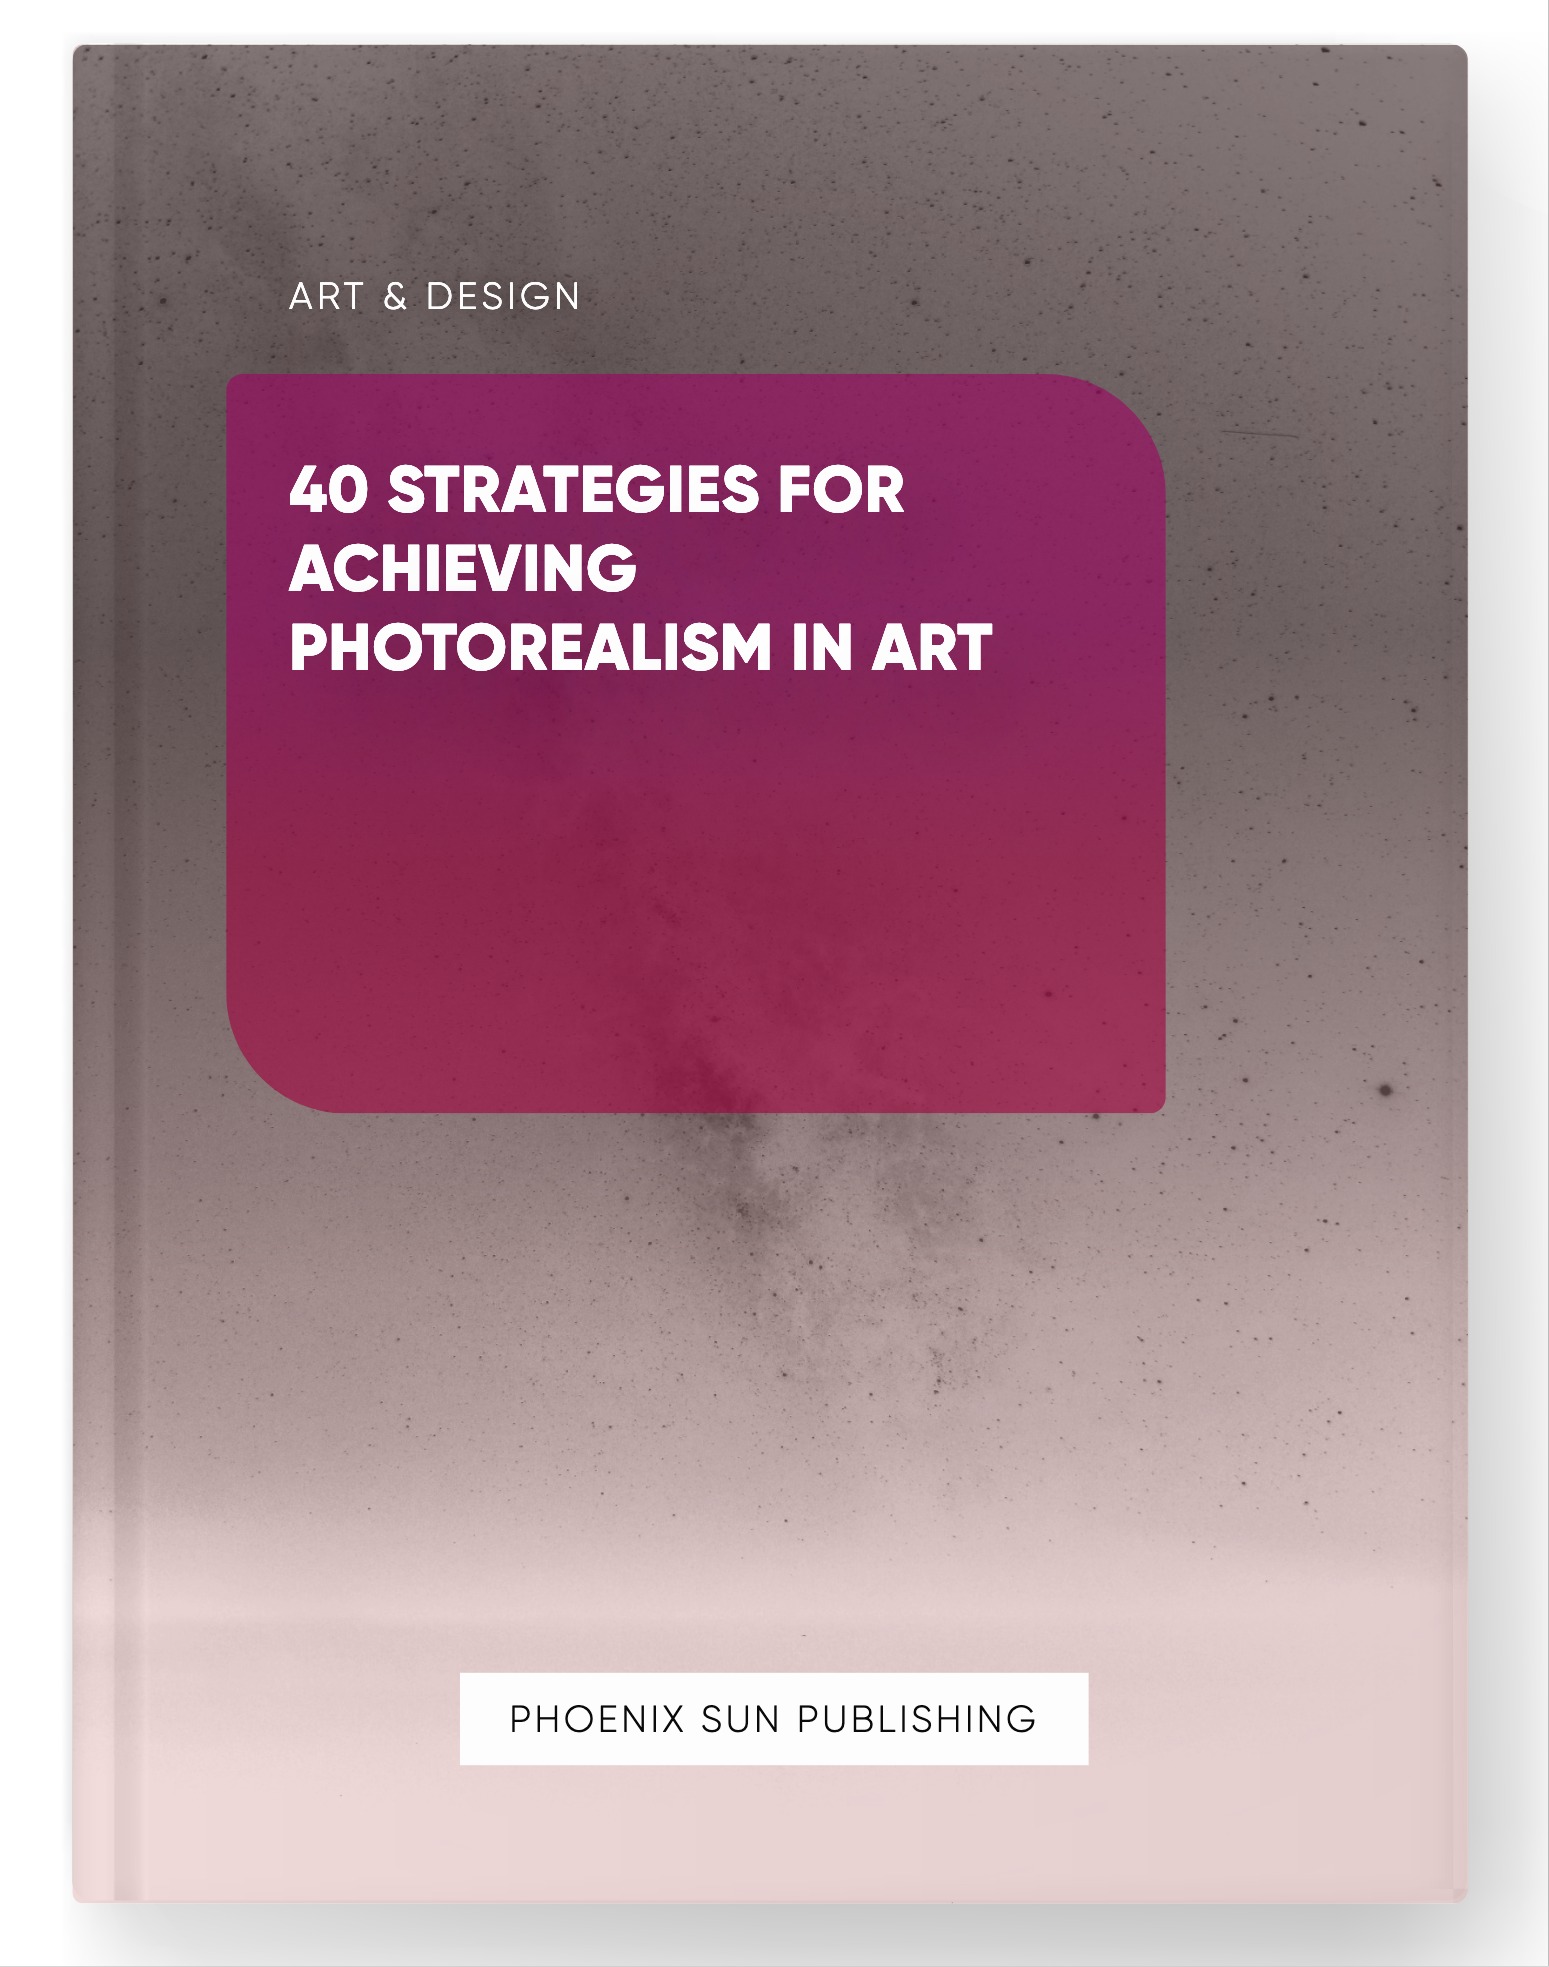 40 Strategies for Achieving Photorealism in Art